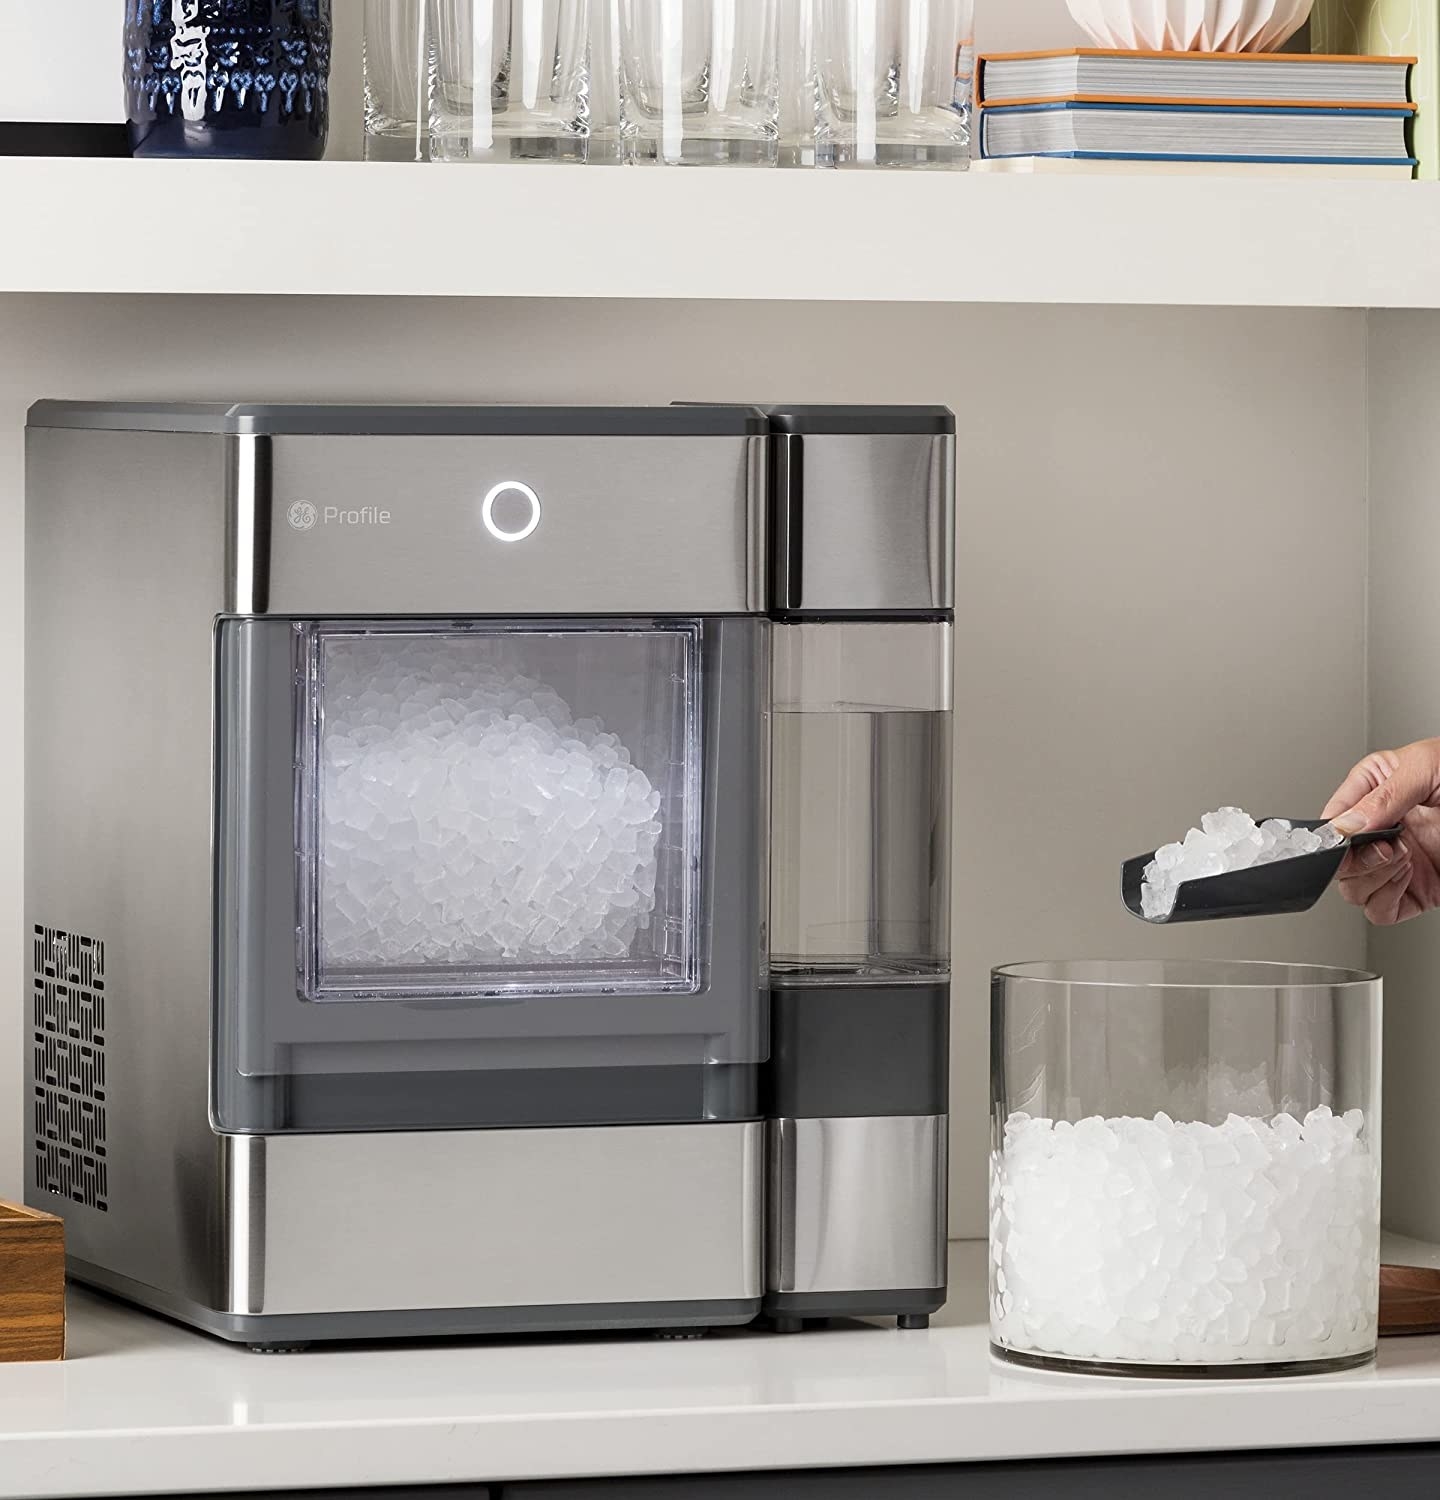 Gray square shaped ice maker perched on a kitchen counter with nugget ice inside